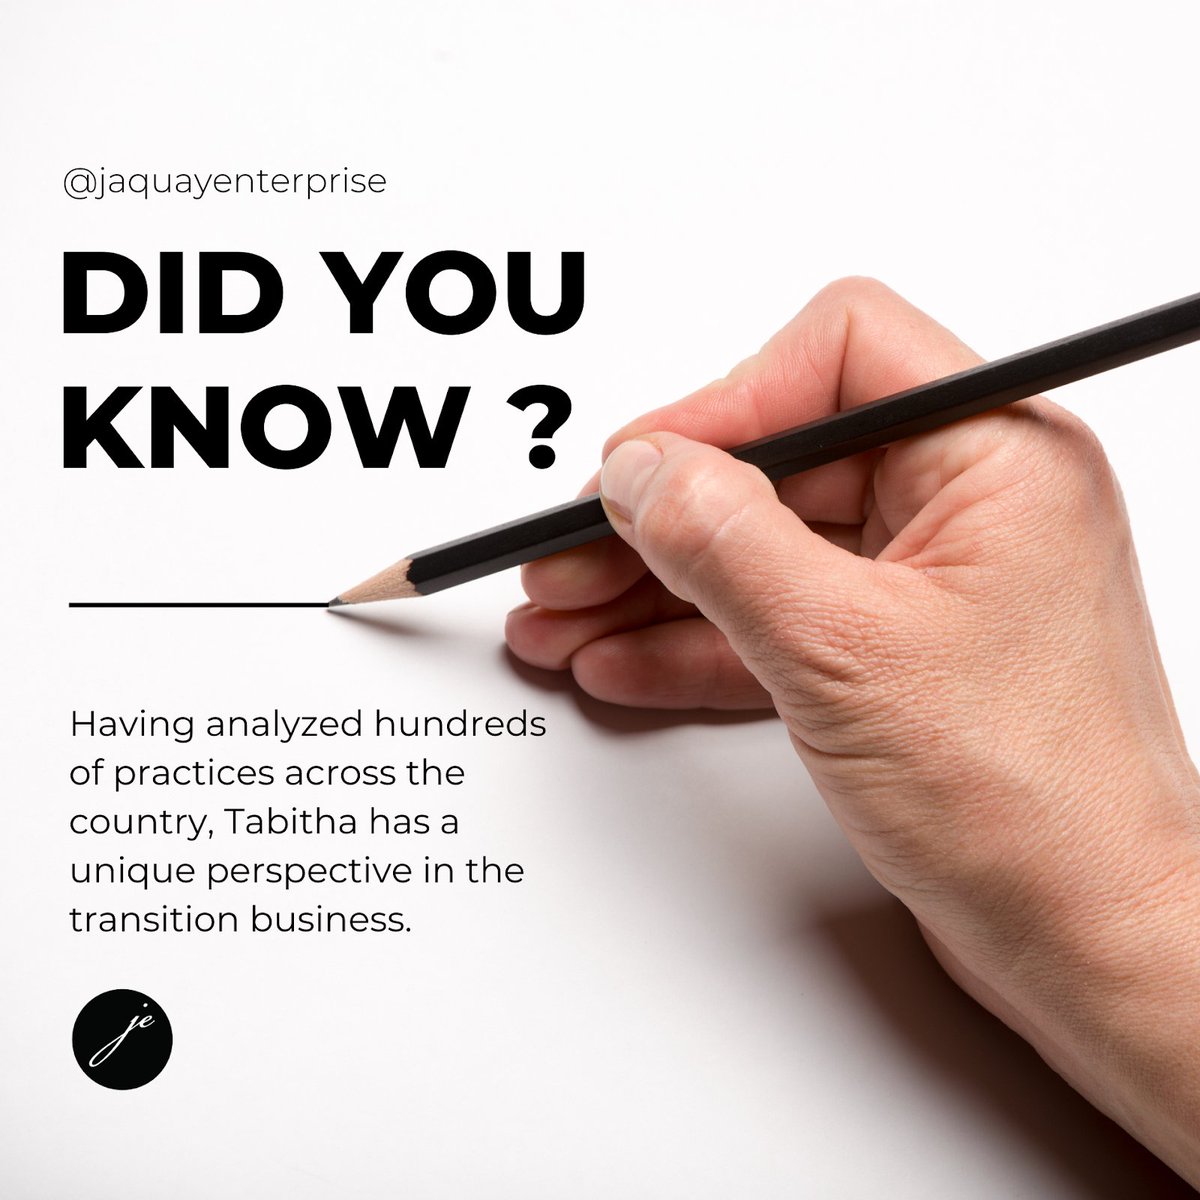 Did you know? Tabitha Jaquay-Fernandez brings a wealth of expertise from analyzing hundreds of practices across the country! Her unique perspective sets her apart as your ultimate guide to success.

#JaquayEnterprise #TransitionAdvisor #TransitionExpert #Perspective #DidYouKnow